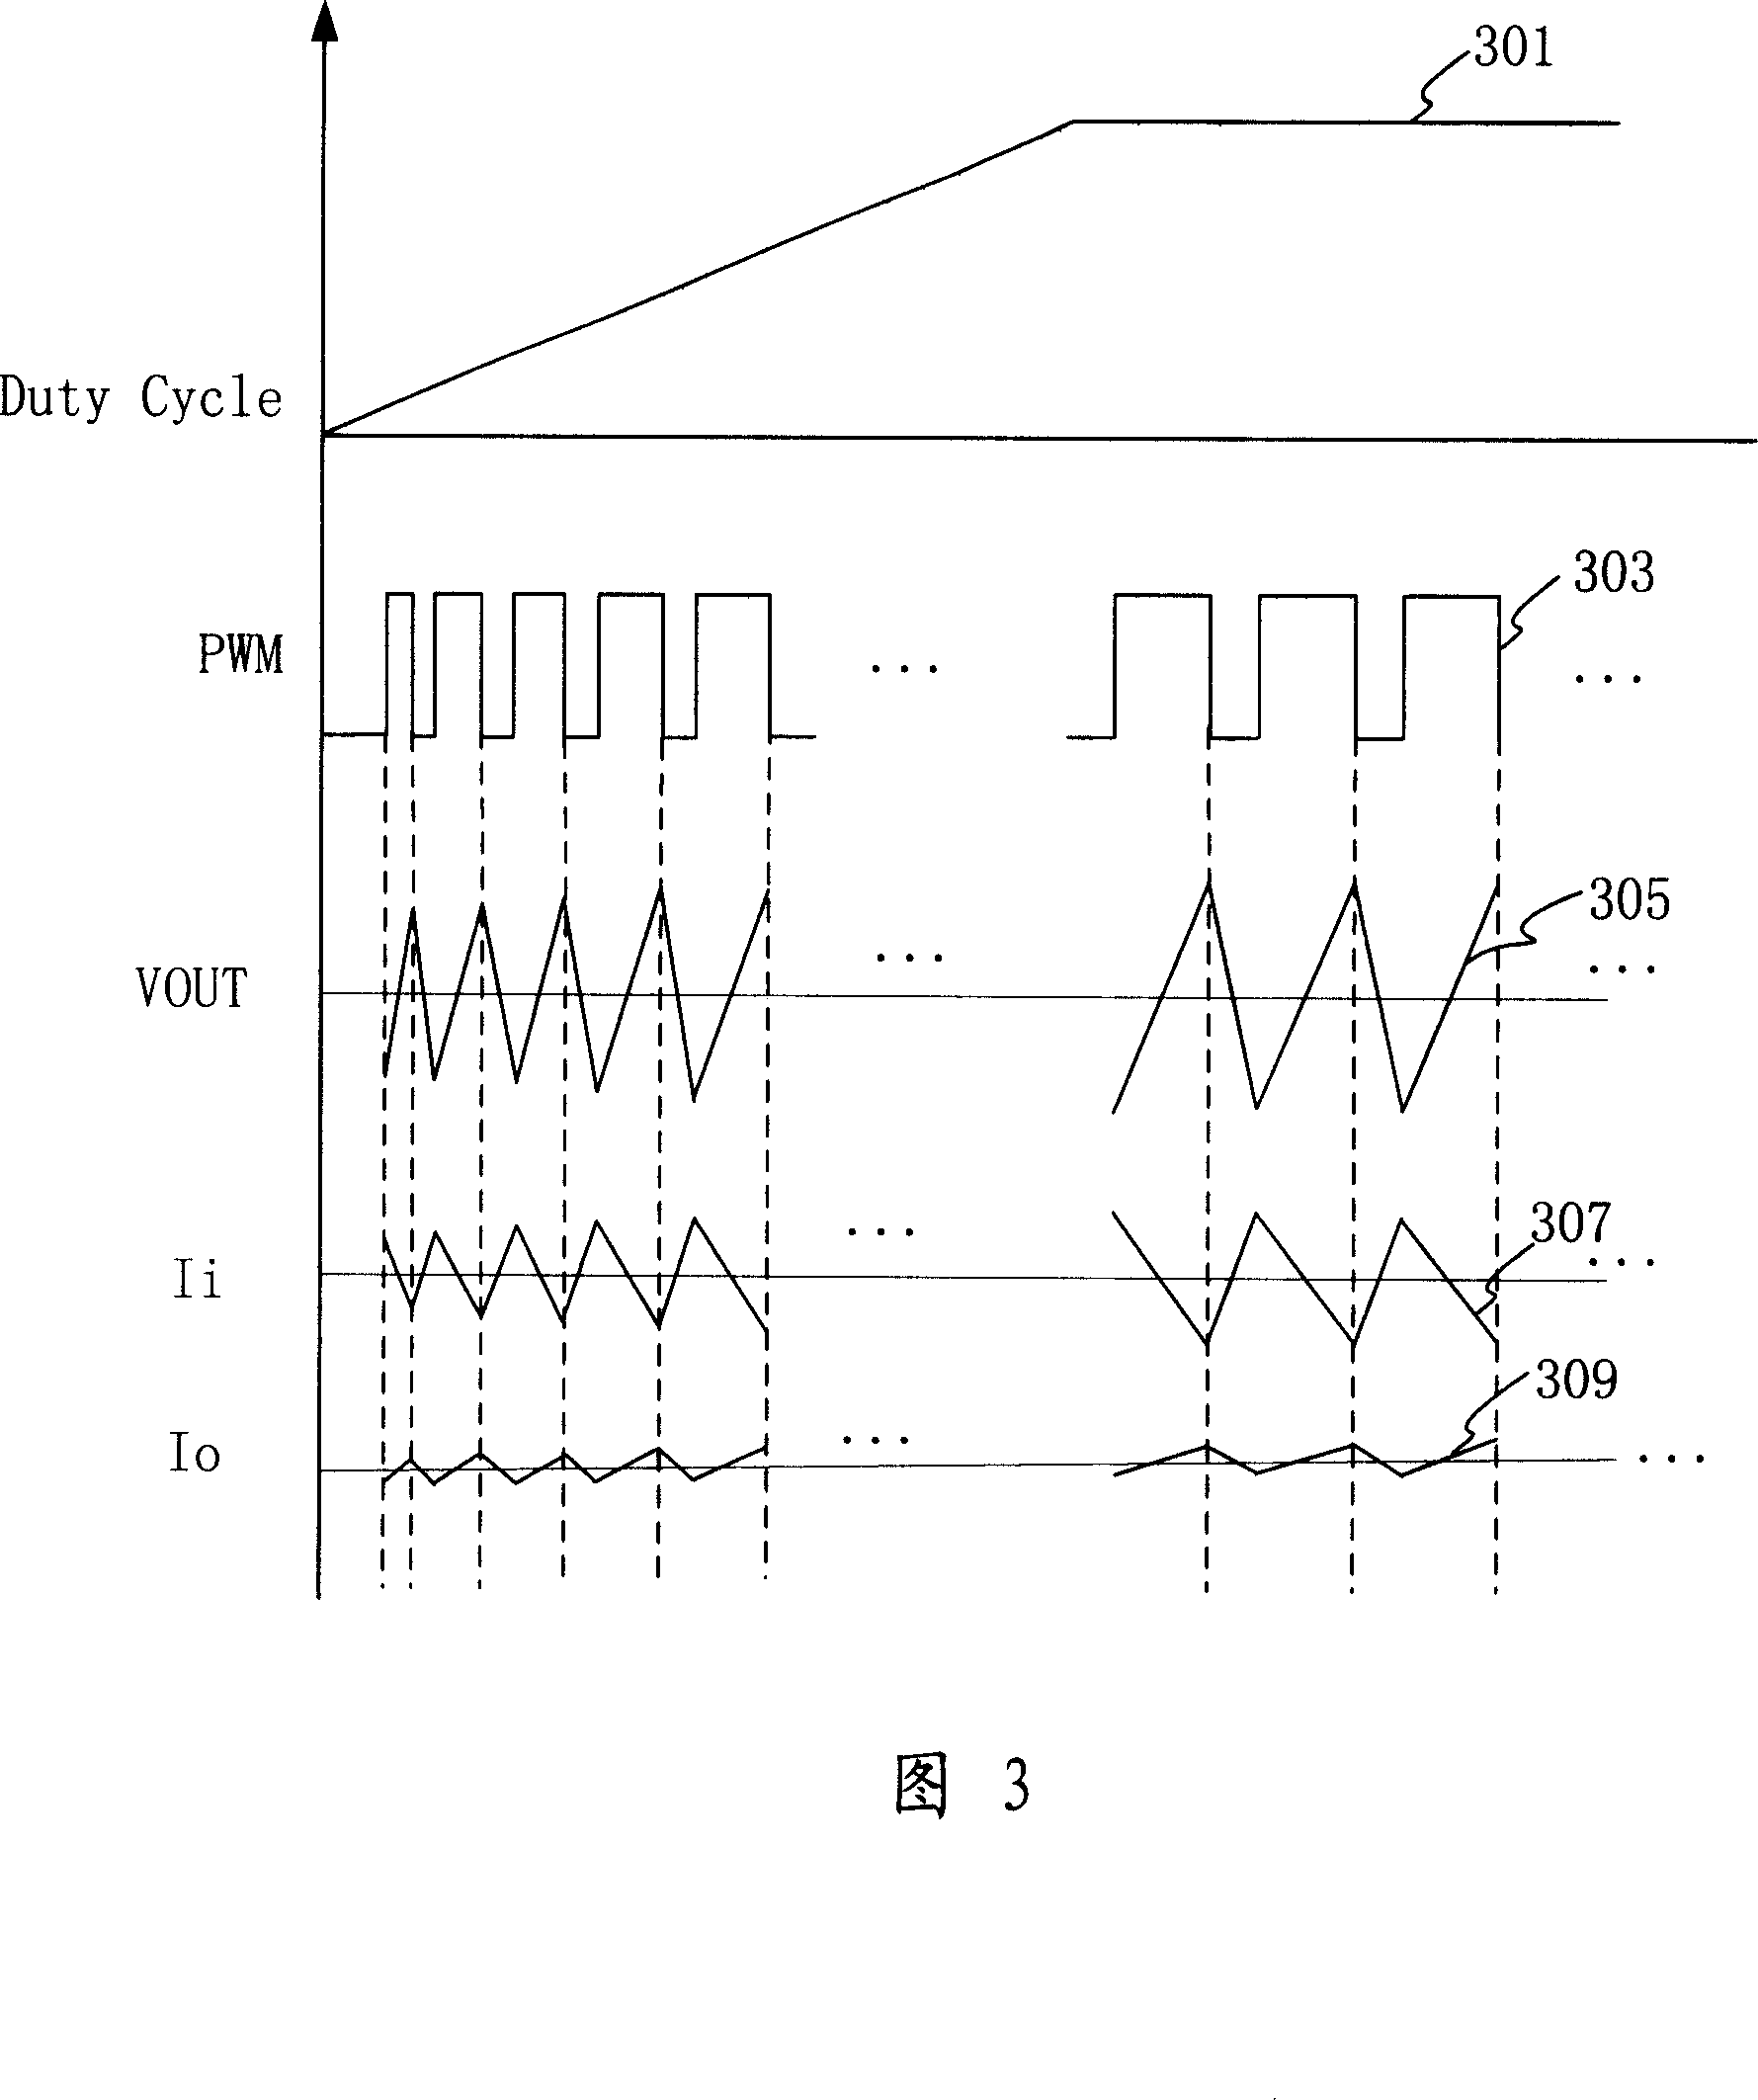 Illuminating system based on light emitting diode and its driving circuit and method